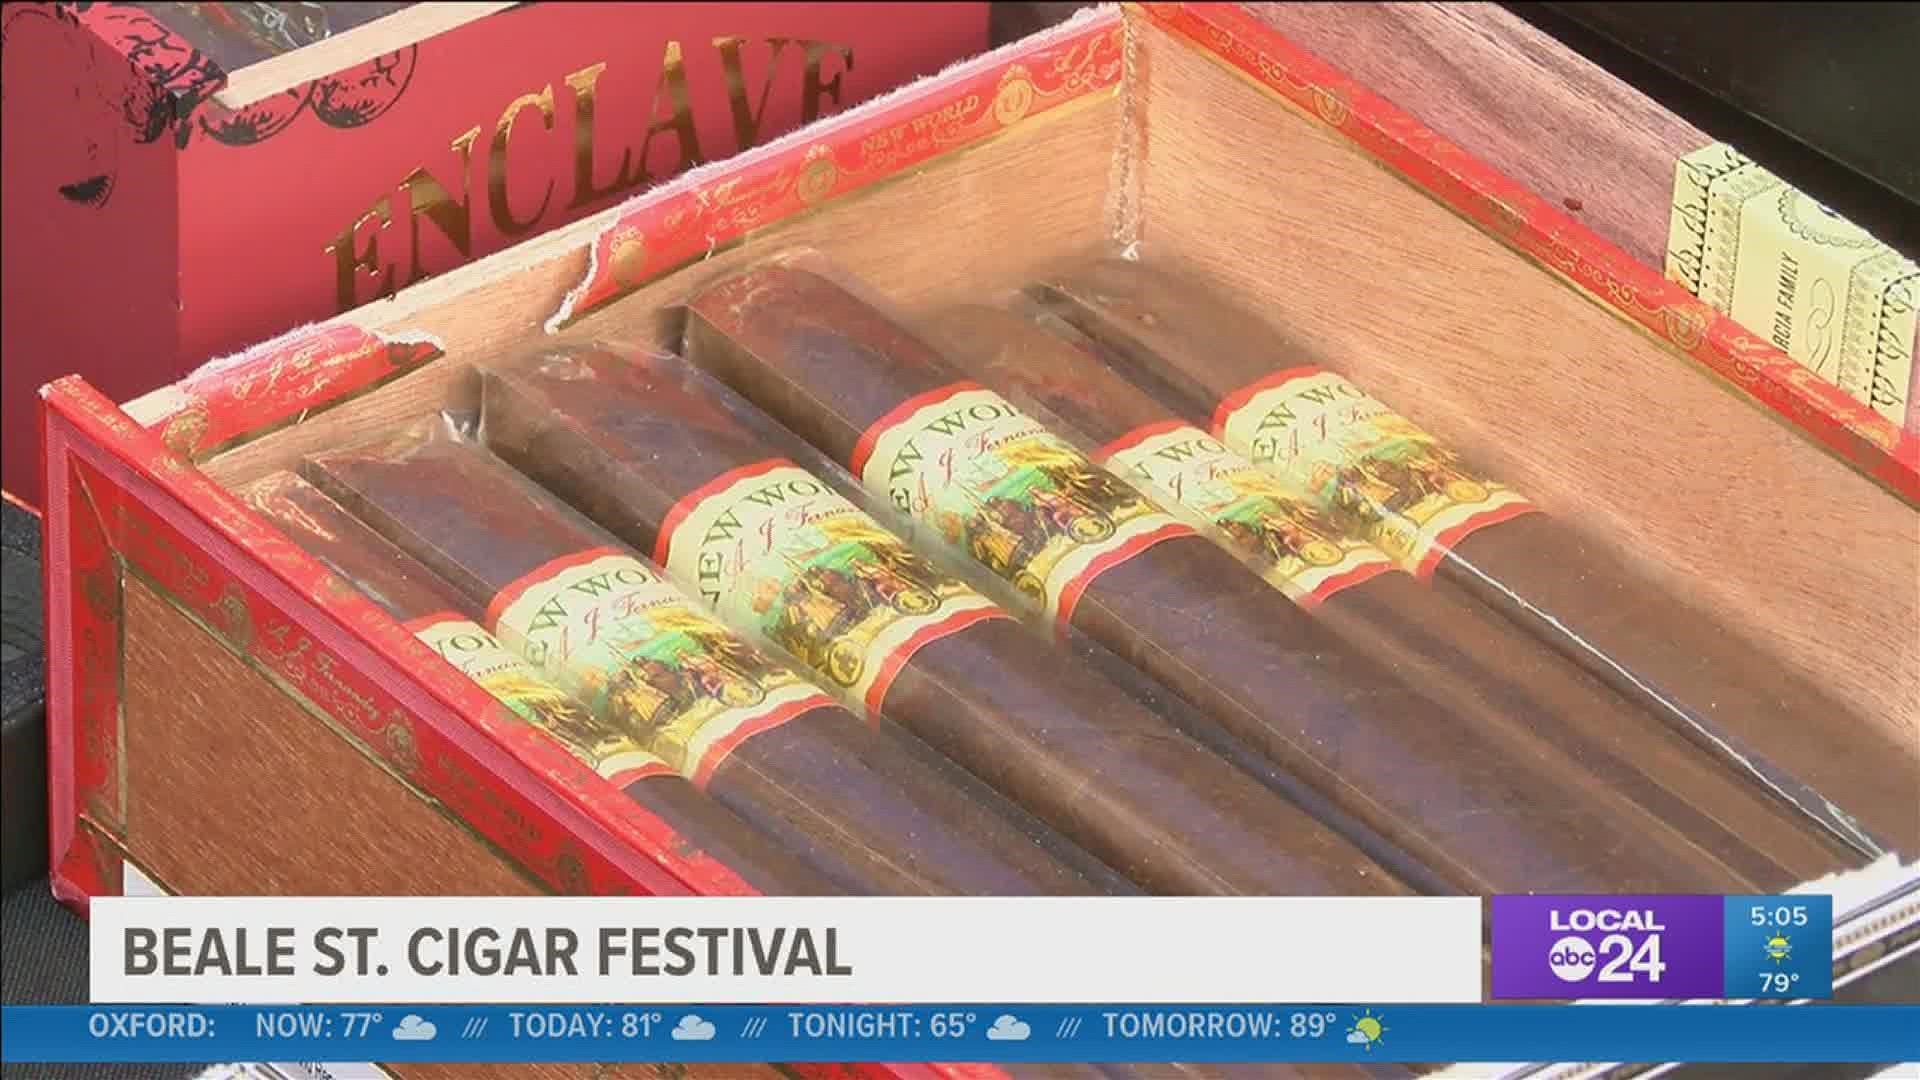 The three-day event brought some of the finest tobacco, along with amazing local talent, to the Bluff City.